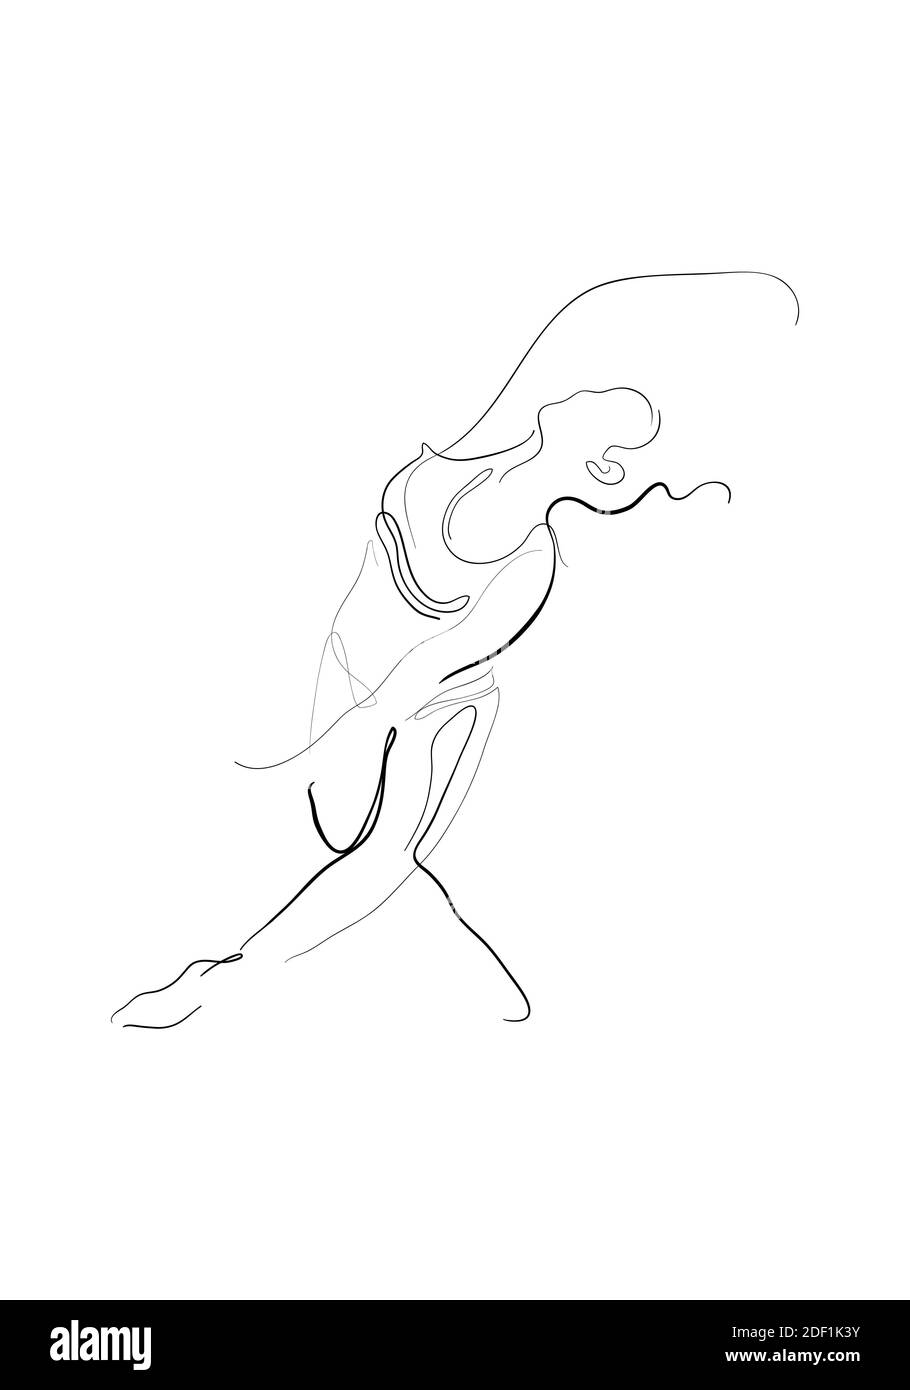 Hand drawn line art illustration of Lasyasana pose or character woman standing in a Graceful dance Yoga pose. Stock Photo